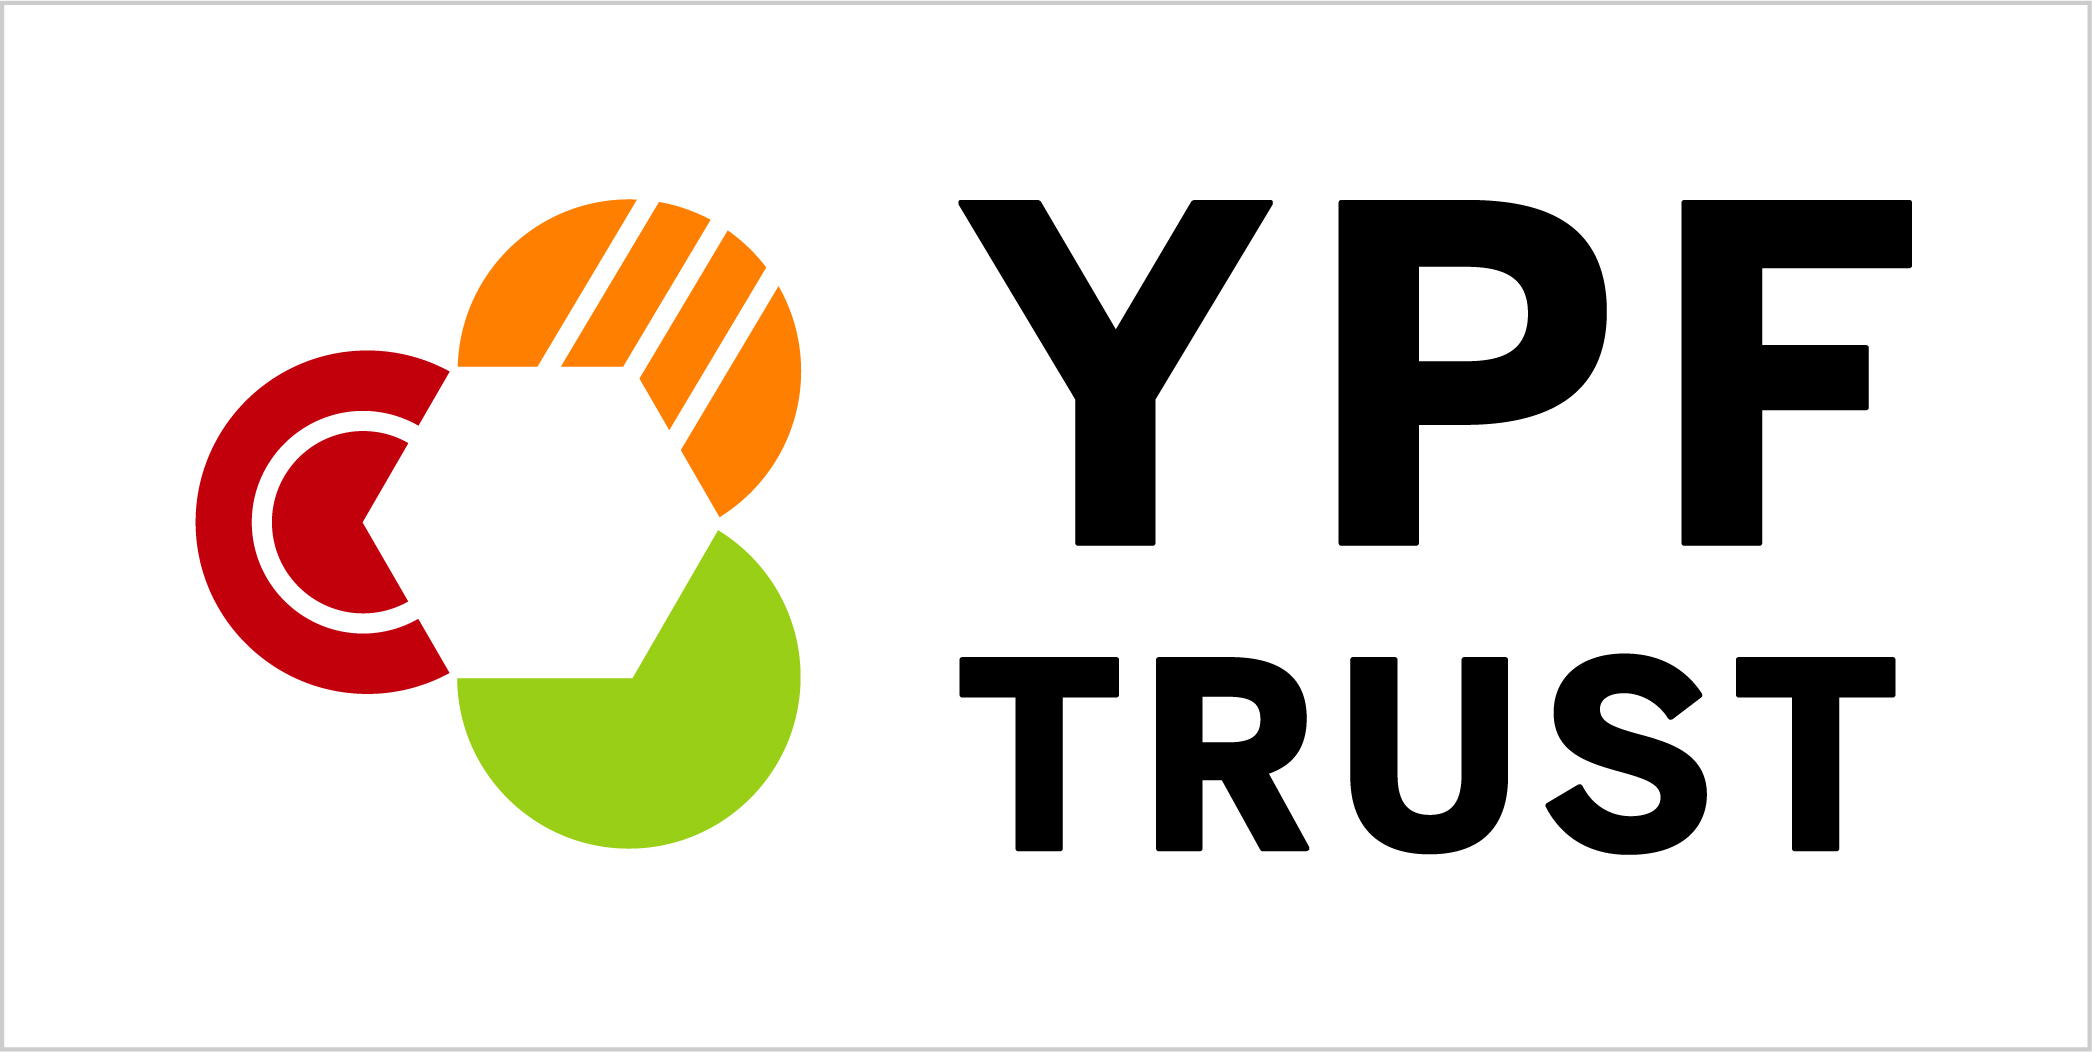 Logo of YPF Trust with a white background, featuring geometric shapes in red, orange, and green on the left and the text "YPF TRUST" in bold black letters on the right.